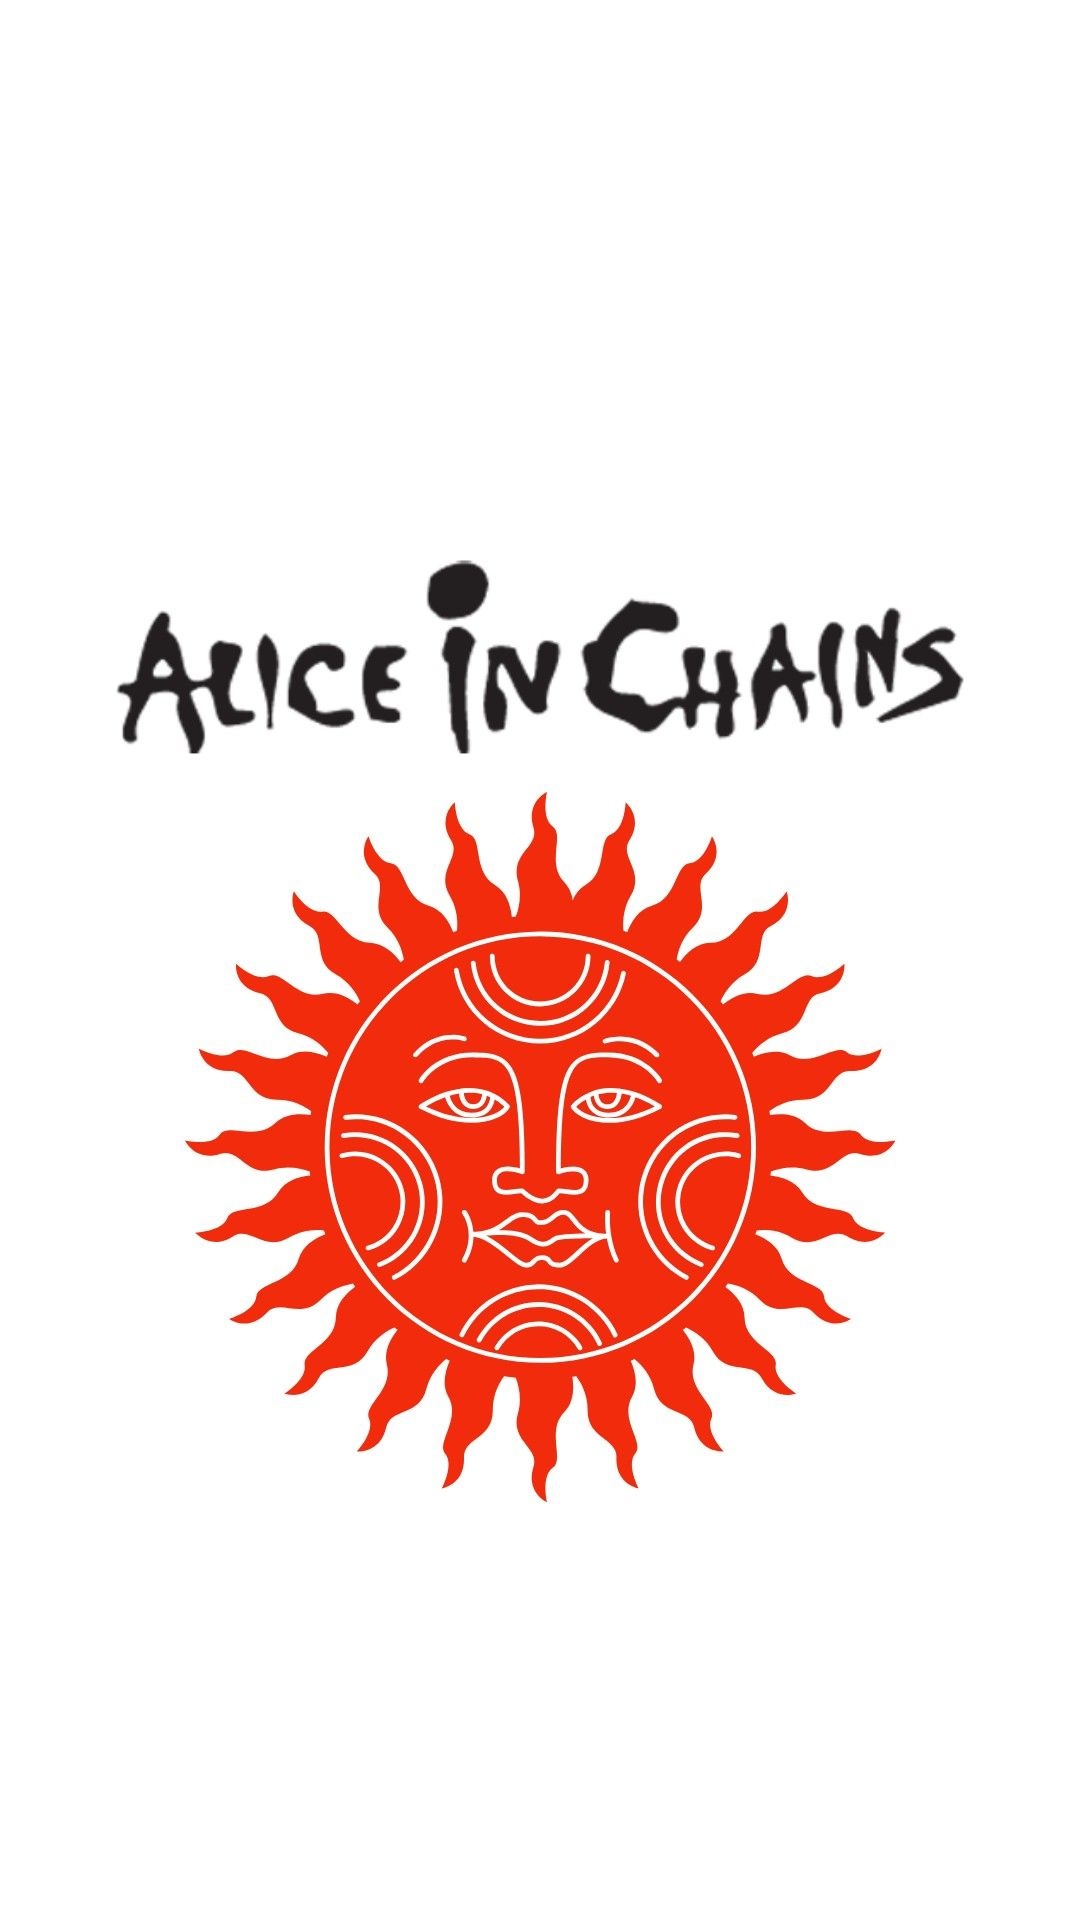 Alice In Chains, Raw and edgy, Android grunge rock, Expressive artistic style, 1080x1920 Full HD Phone